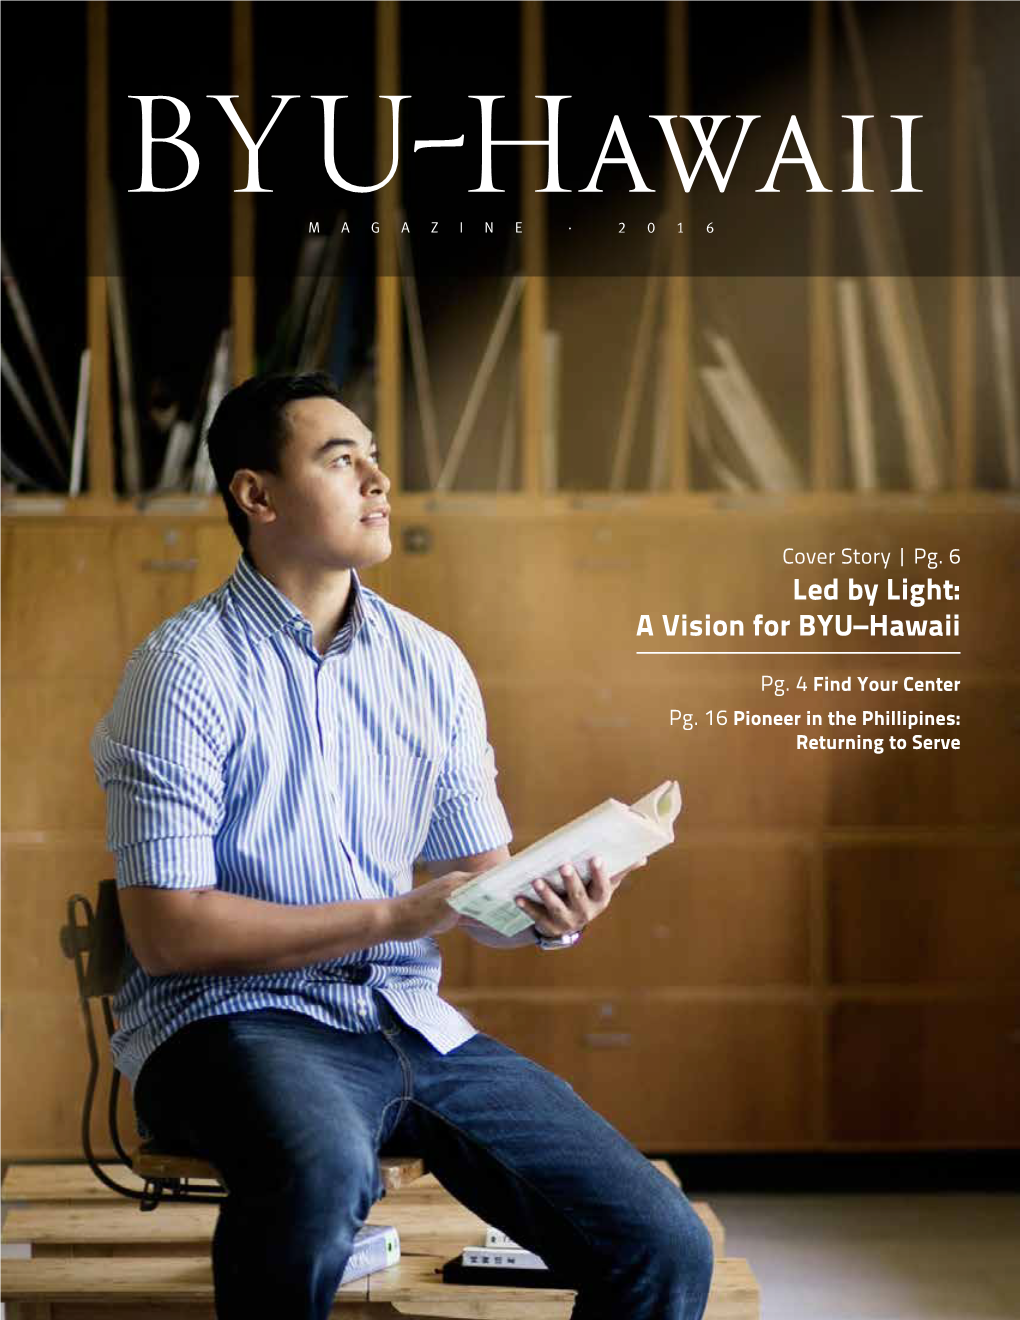 Led by Light: a Vision for BYU–Hawaii